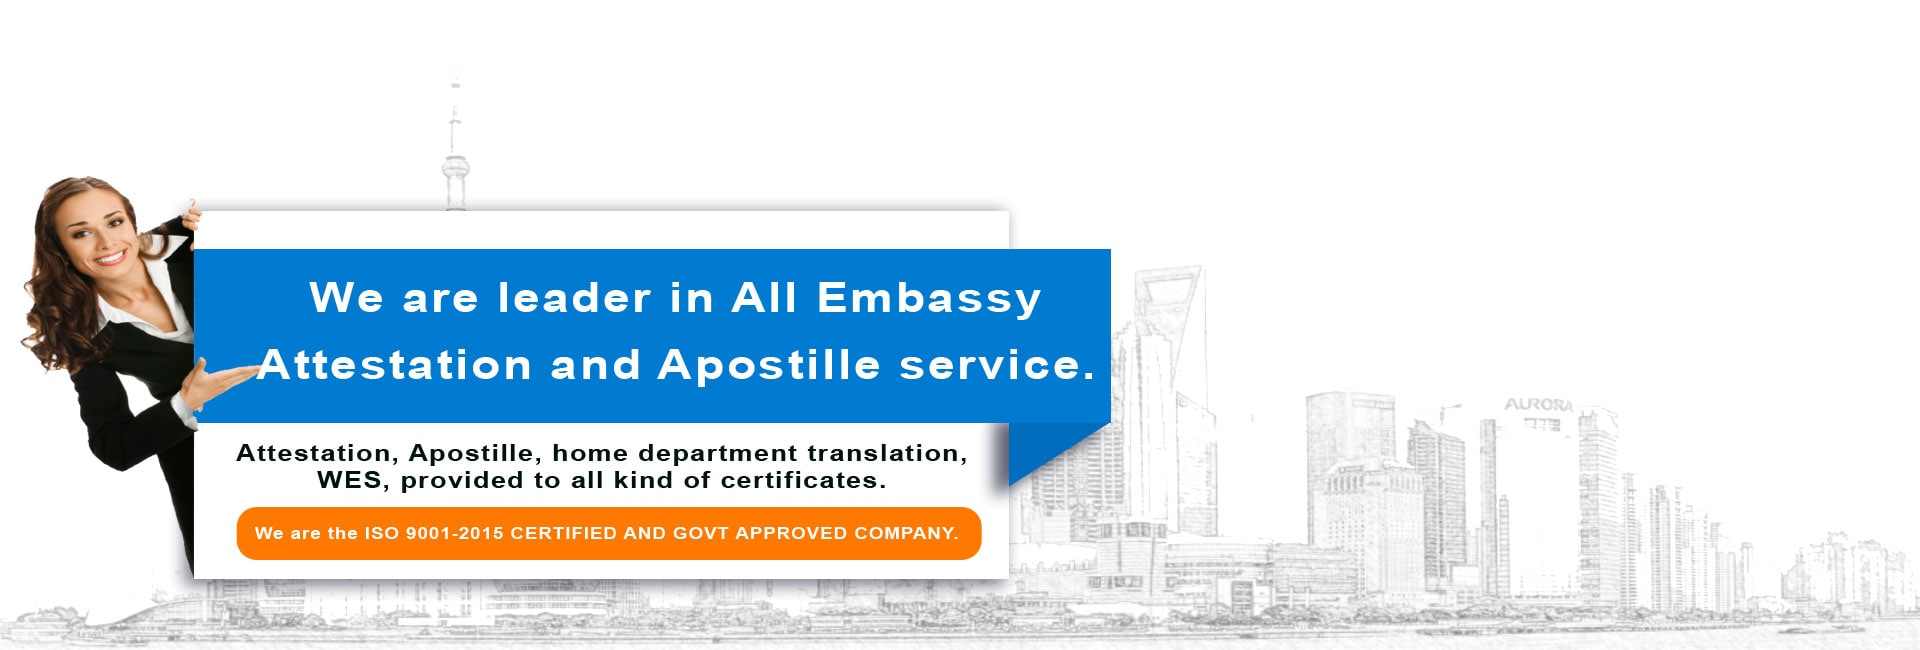 Certificate Attestation Agency in Bangalore, attestation services near me, hrd attestation for nurses in bangalore, uae attestation services in bangalore, hrd attestation bangalore karnataka, apostille services in bangalore, Apostille Certification Services in Bangalore, Apostille Attestation in Bangalore, apostille attestation fee bangalore